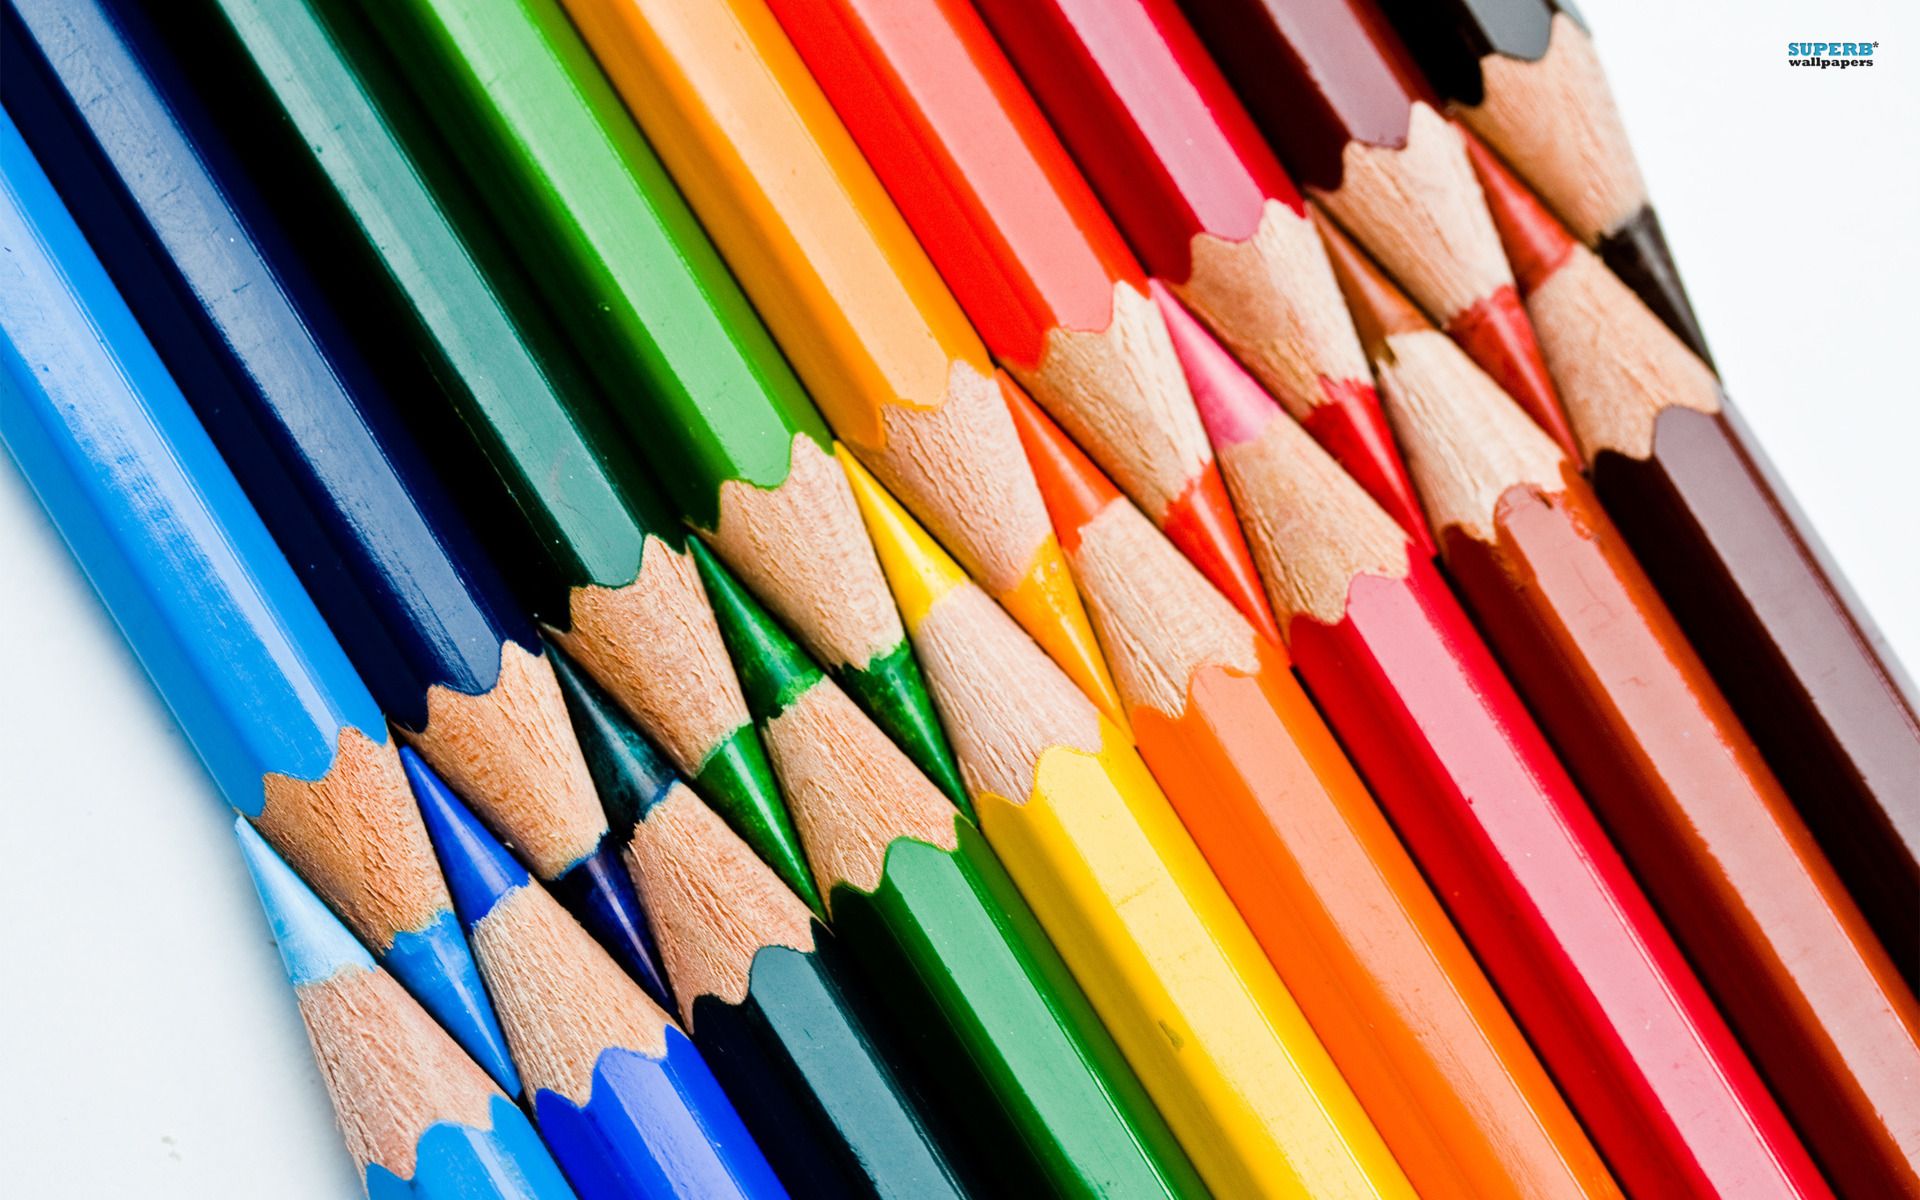 Colored pencils wallpaper - Photography wallpapers - #9474